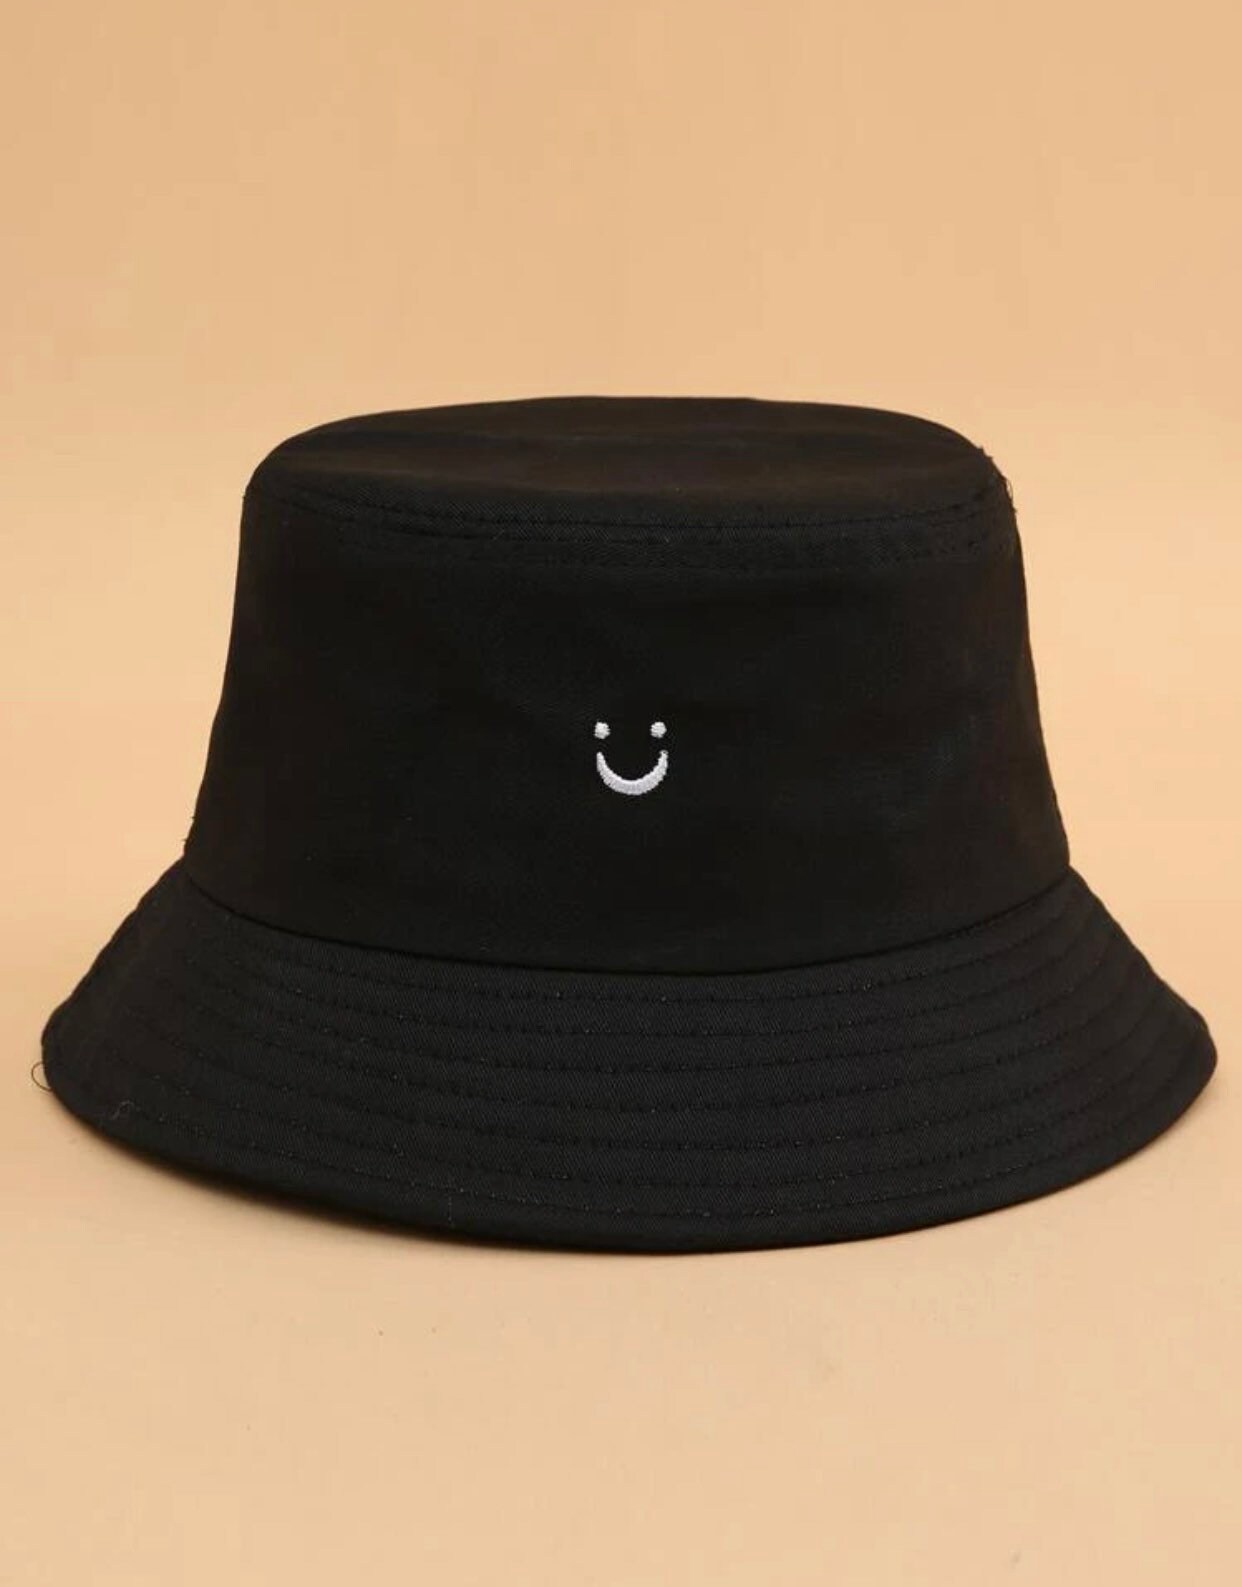 Smiley Face Bucket Hat Funny Hat Funny Gifts Gifts for Her - Etsy